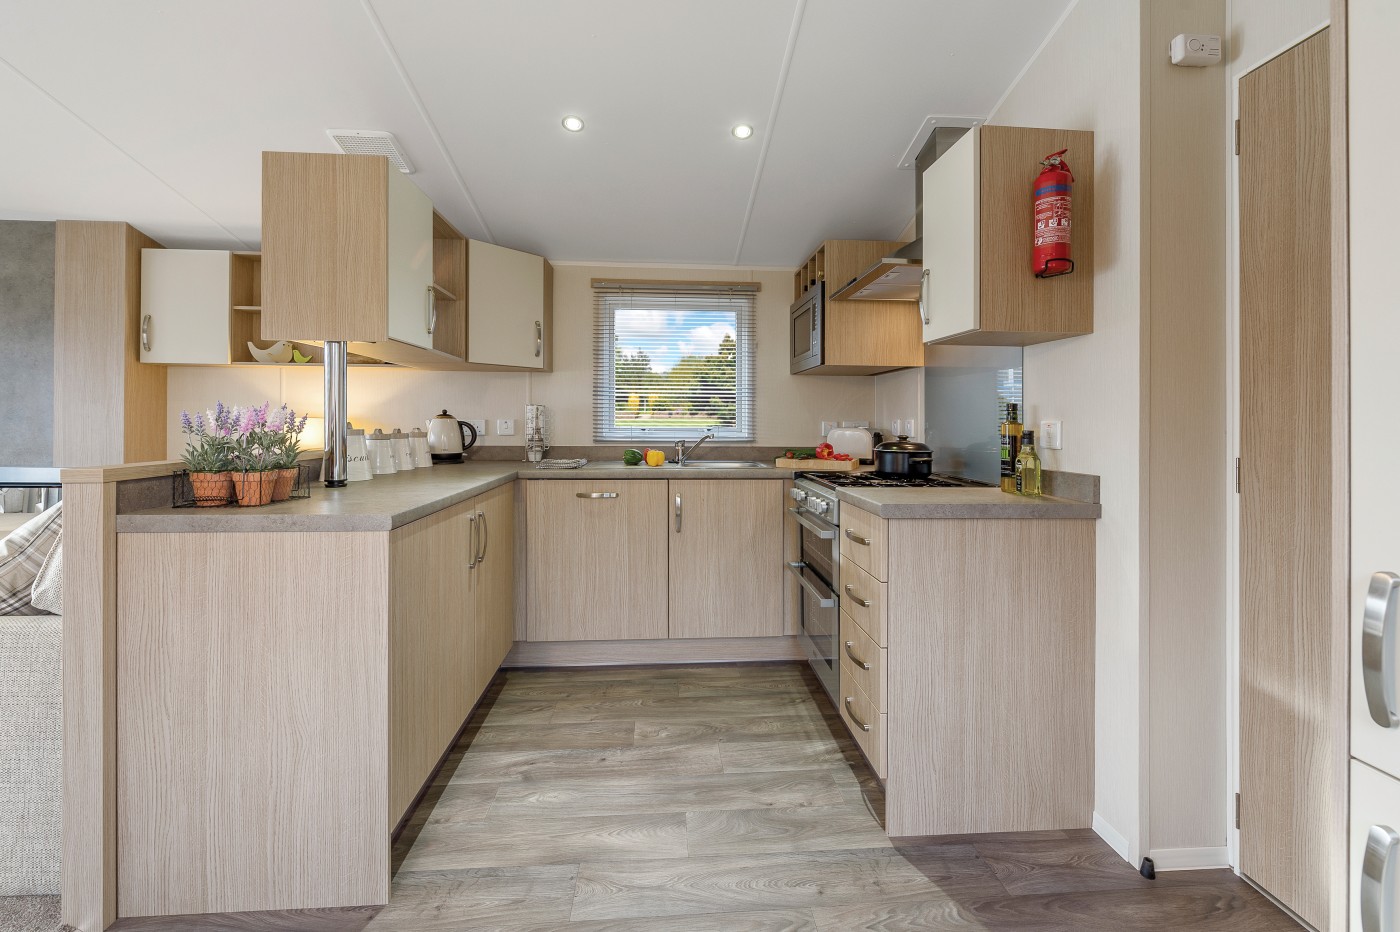 The 2016 Willerby Brockenhurst offers views of the grassy park from the large windows. It has two bedrooms and an open plan kitchen/living room layout. 
Bedroom 1 – Double
Bedroom 2 – Twin